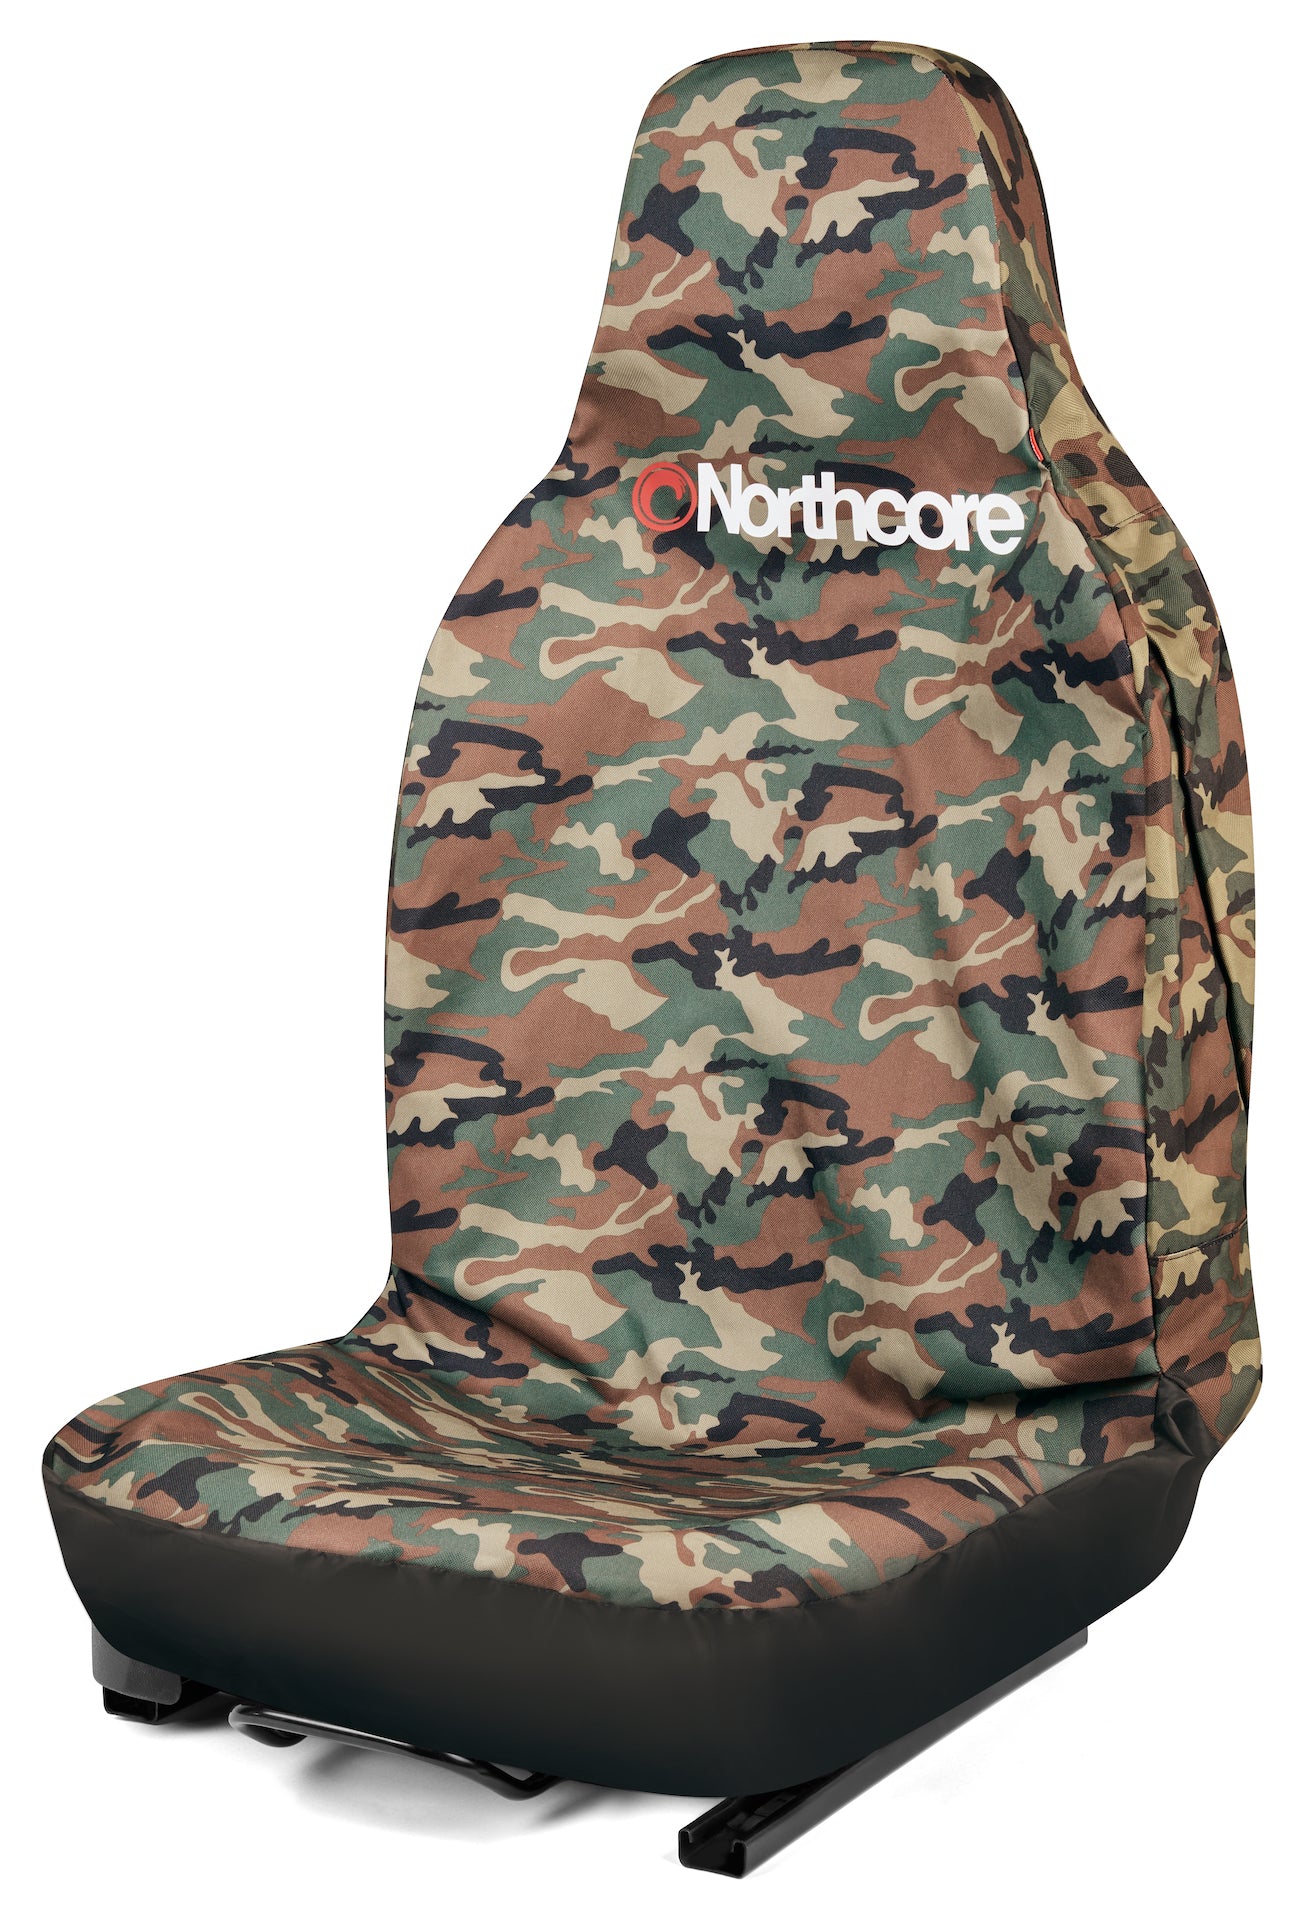 Northcore Water Resistant Single Car Seat Cover Camo - Boards360